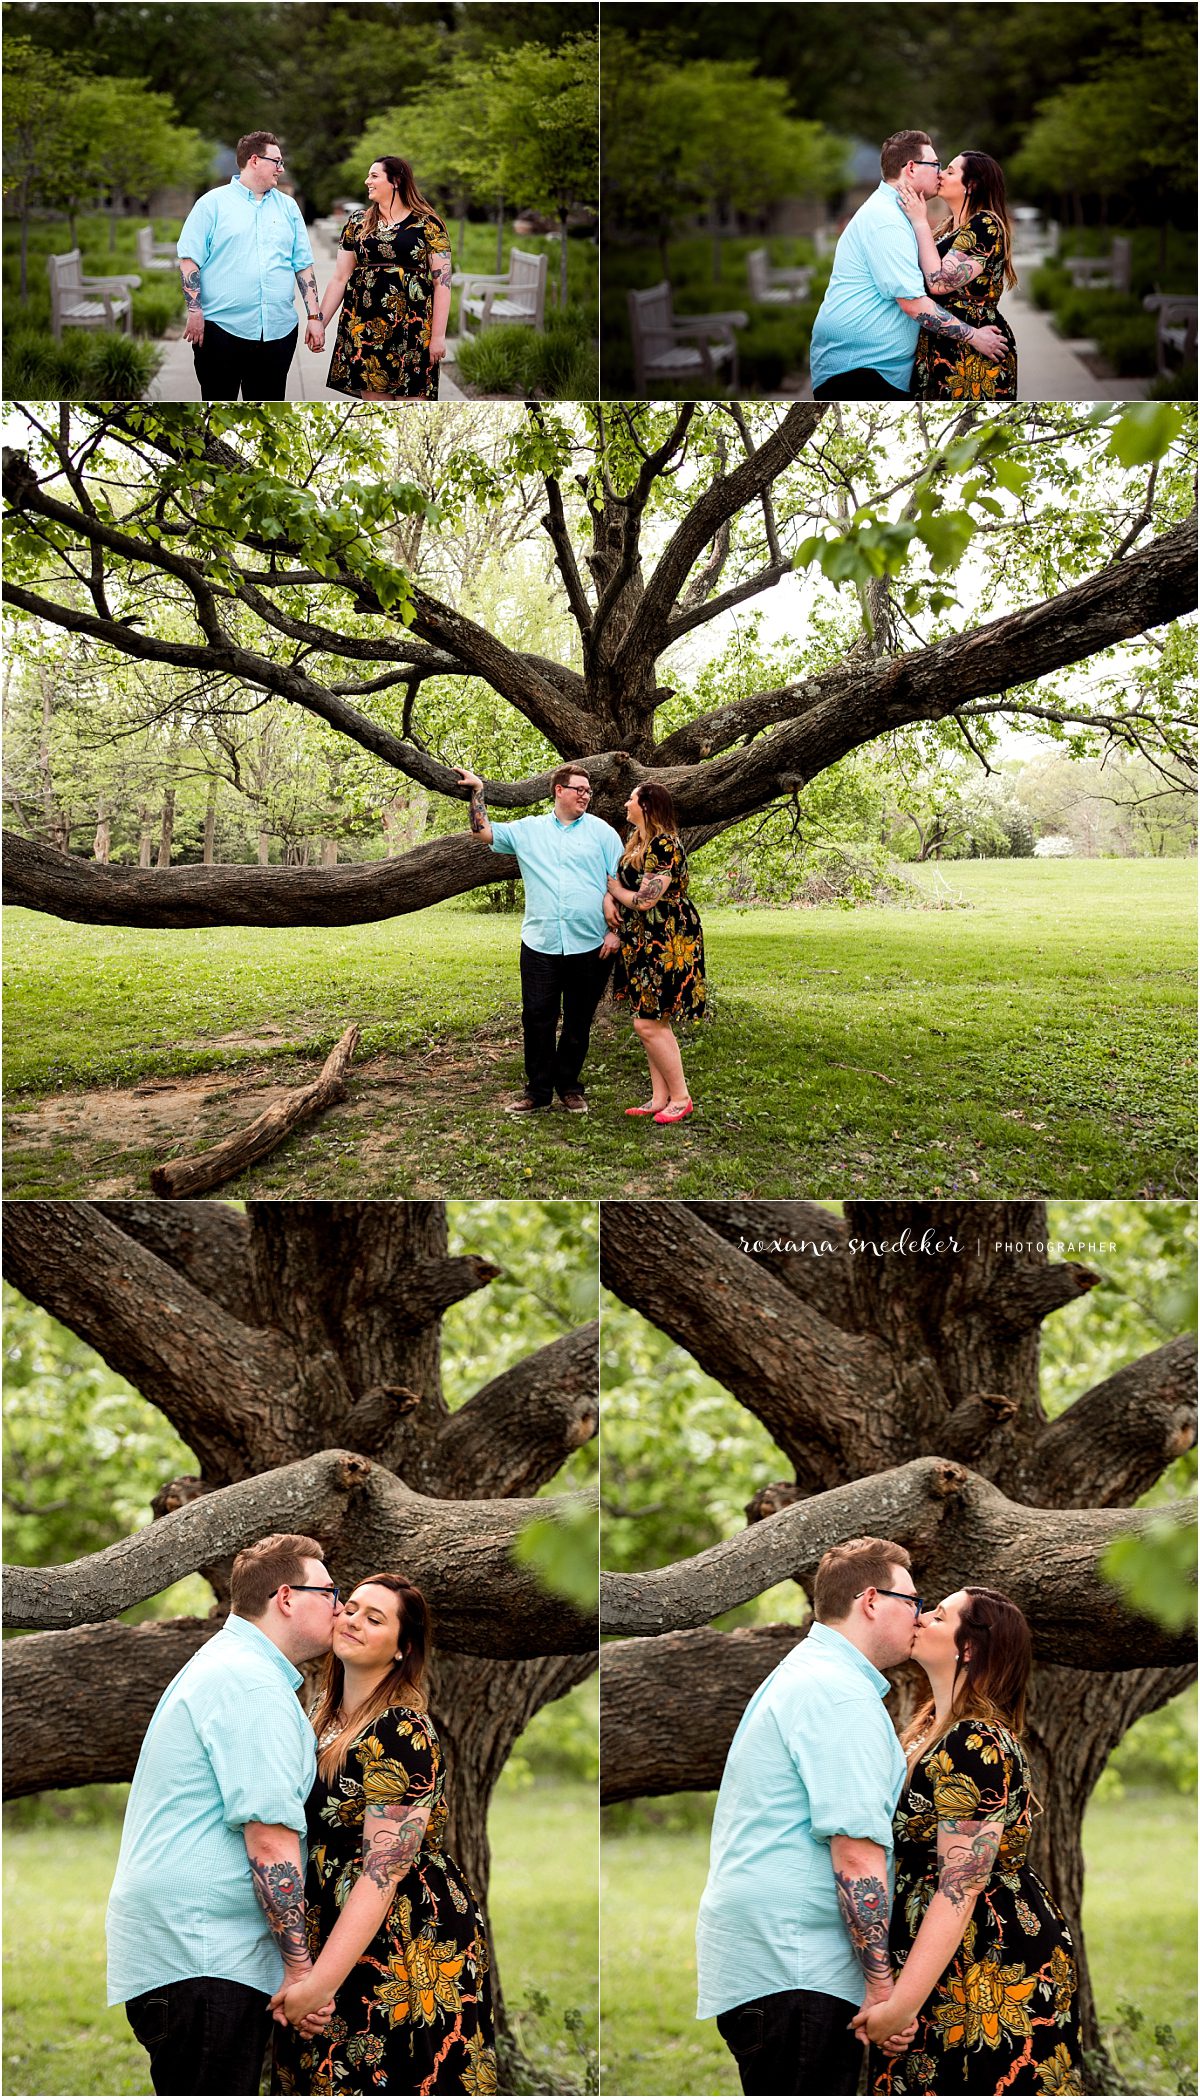 Holliday Park Engagement Session Indianapolis, Indiana